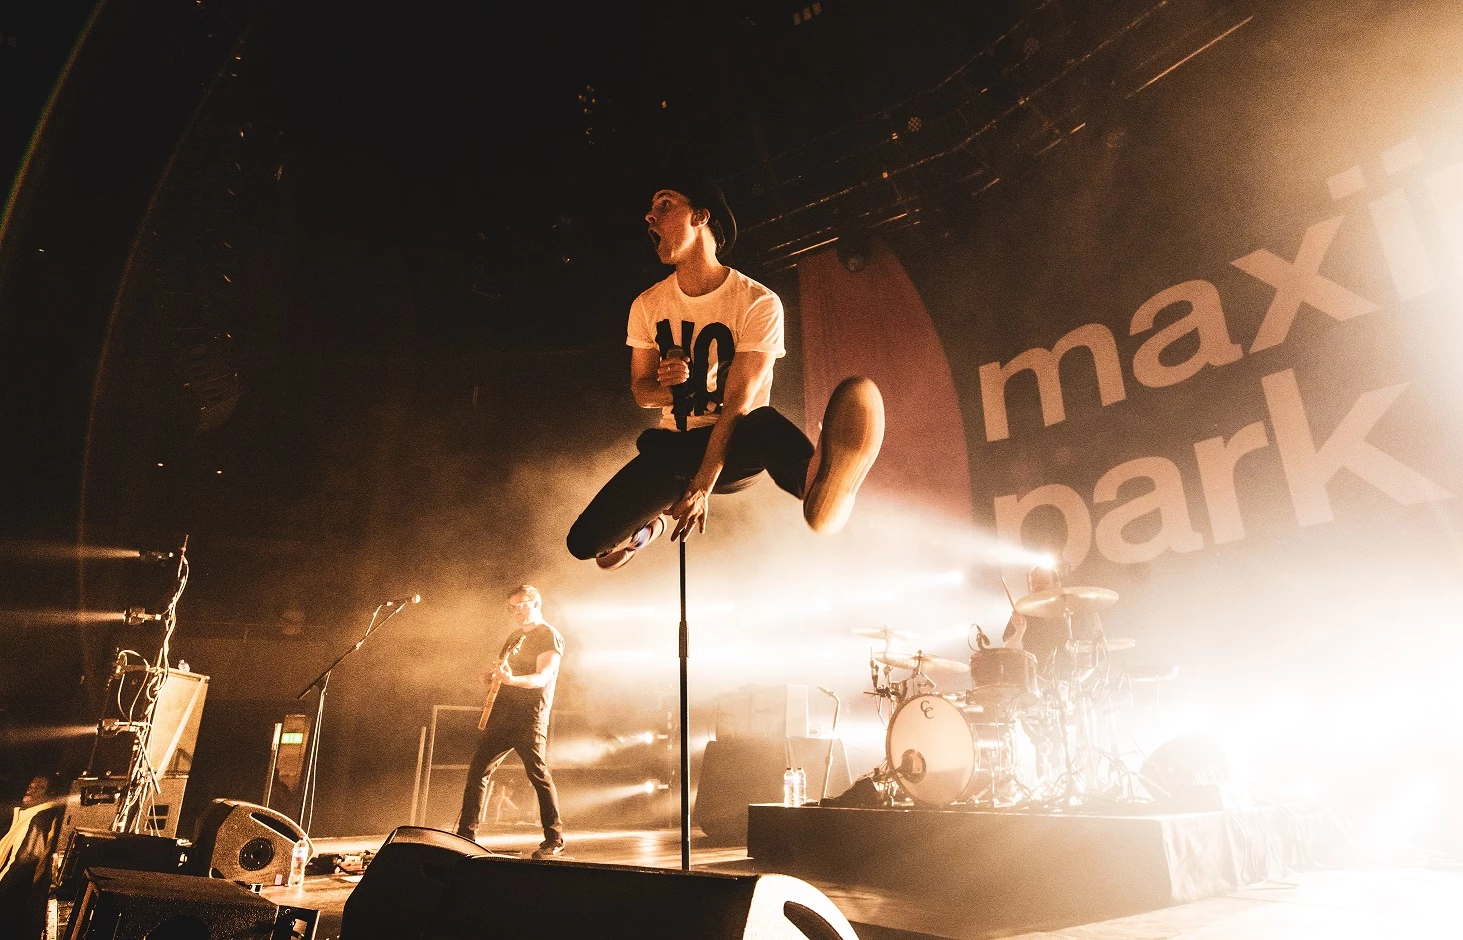 Maximo Park will bring their energetic live show to The Tall Ships Races this Summer